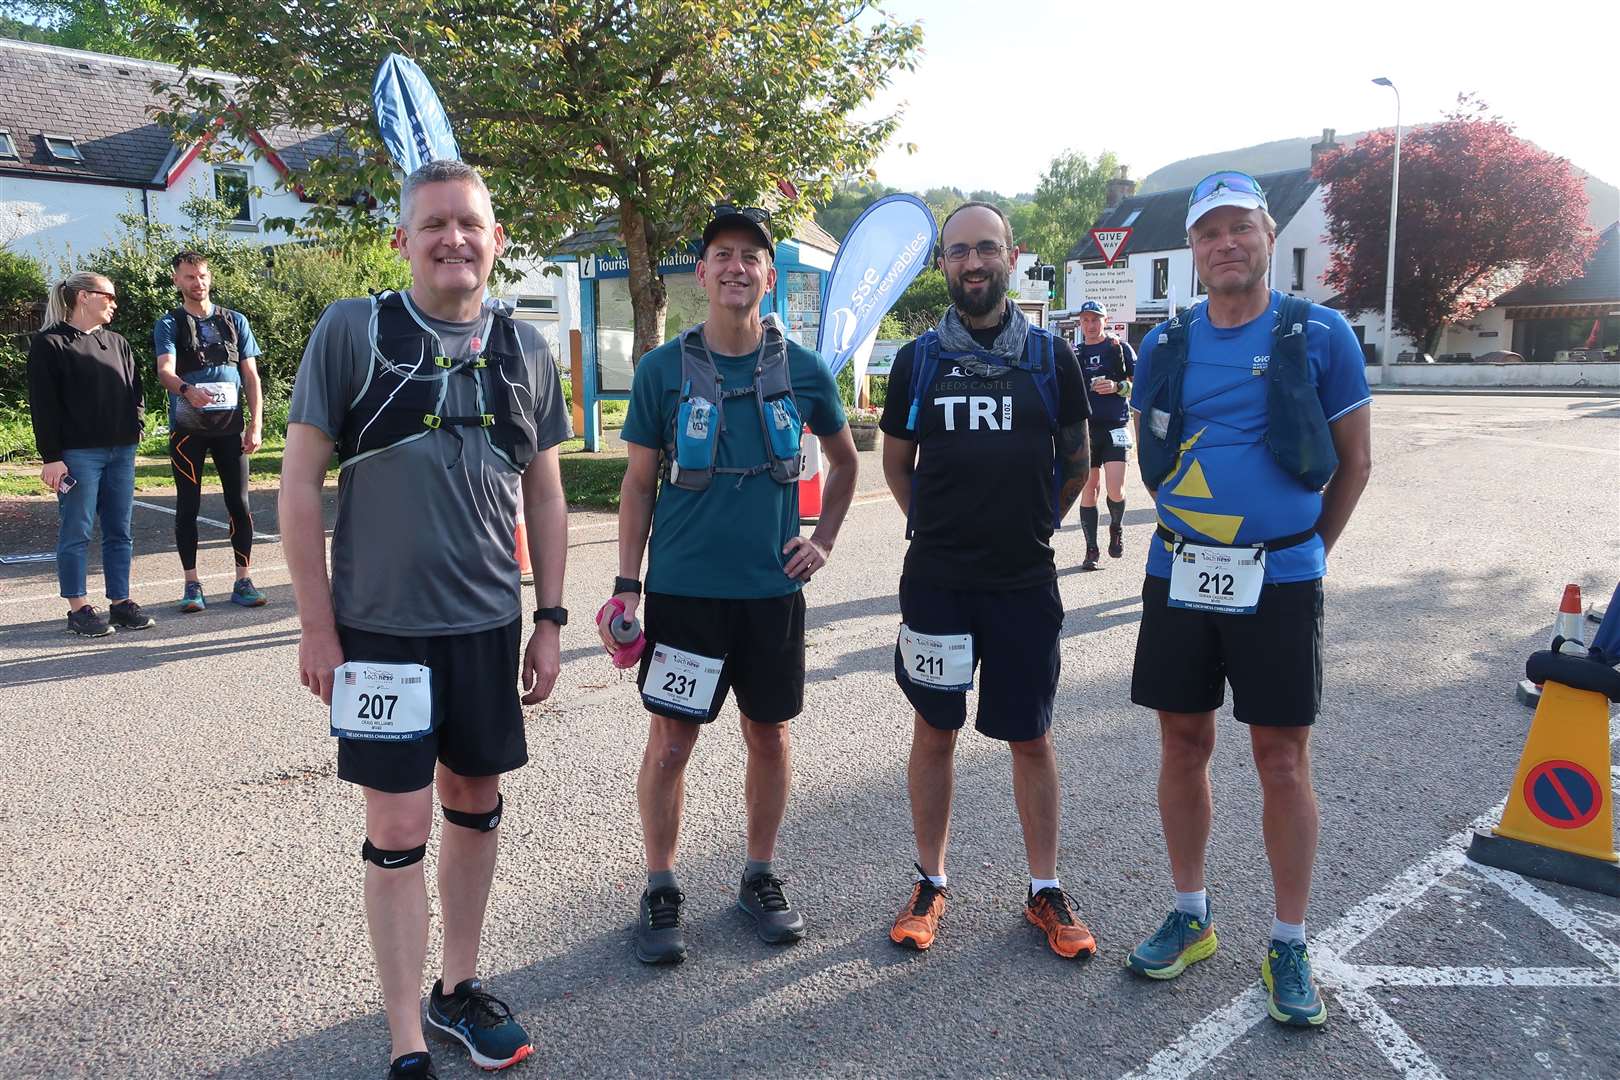 Runners from around the world - including Craig who lives in New York, Todd from California, Gavin from England and Goran from Sweden - took part in the Loch Ness 360 Challenge. Picture: John Davidson